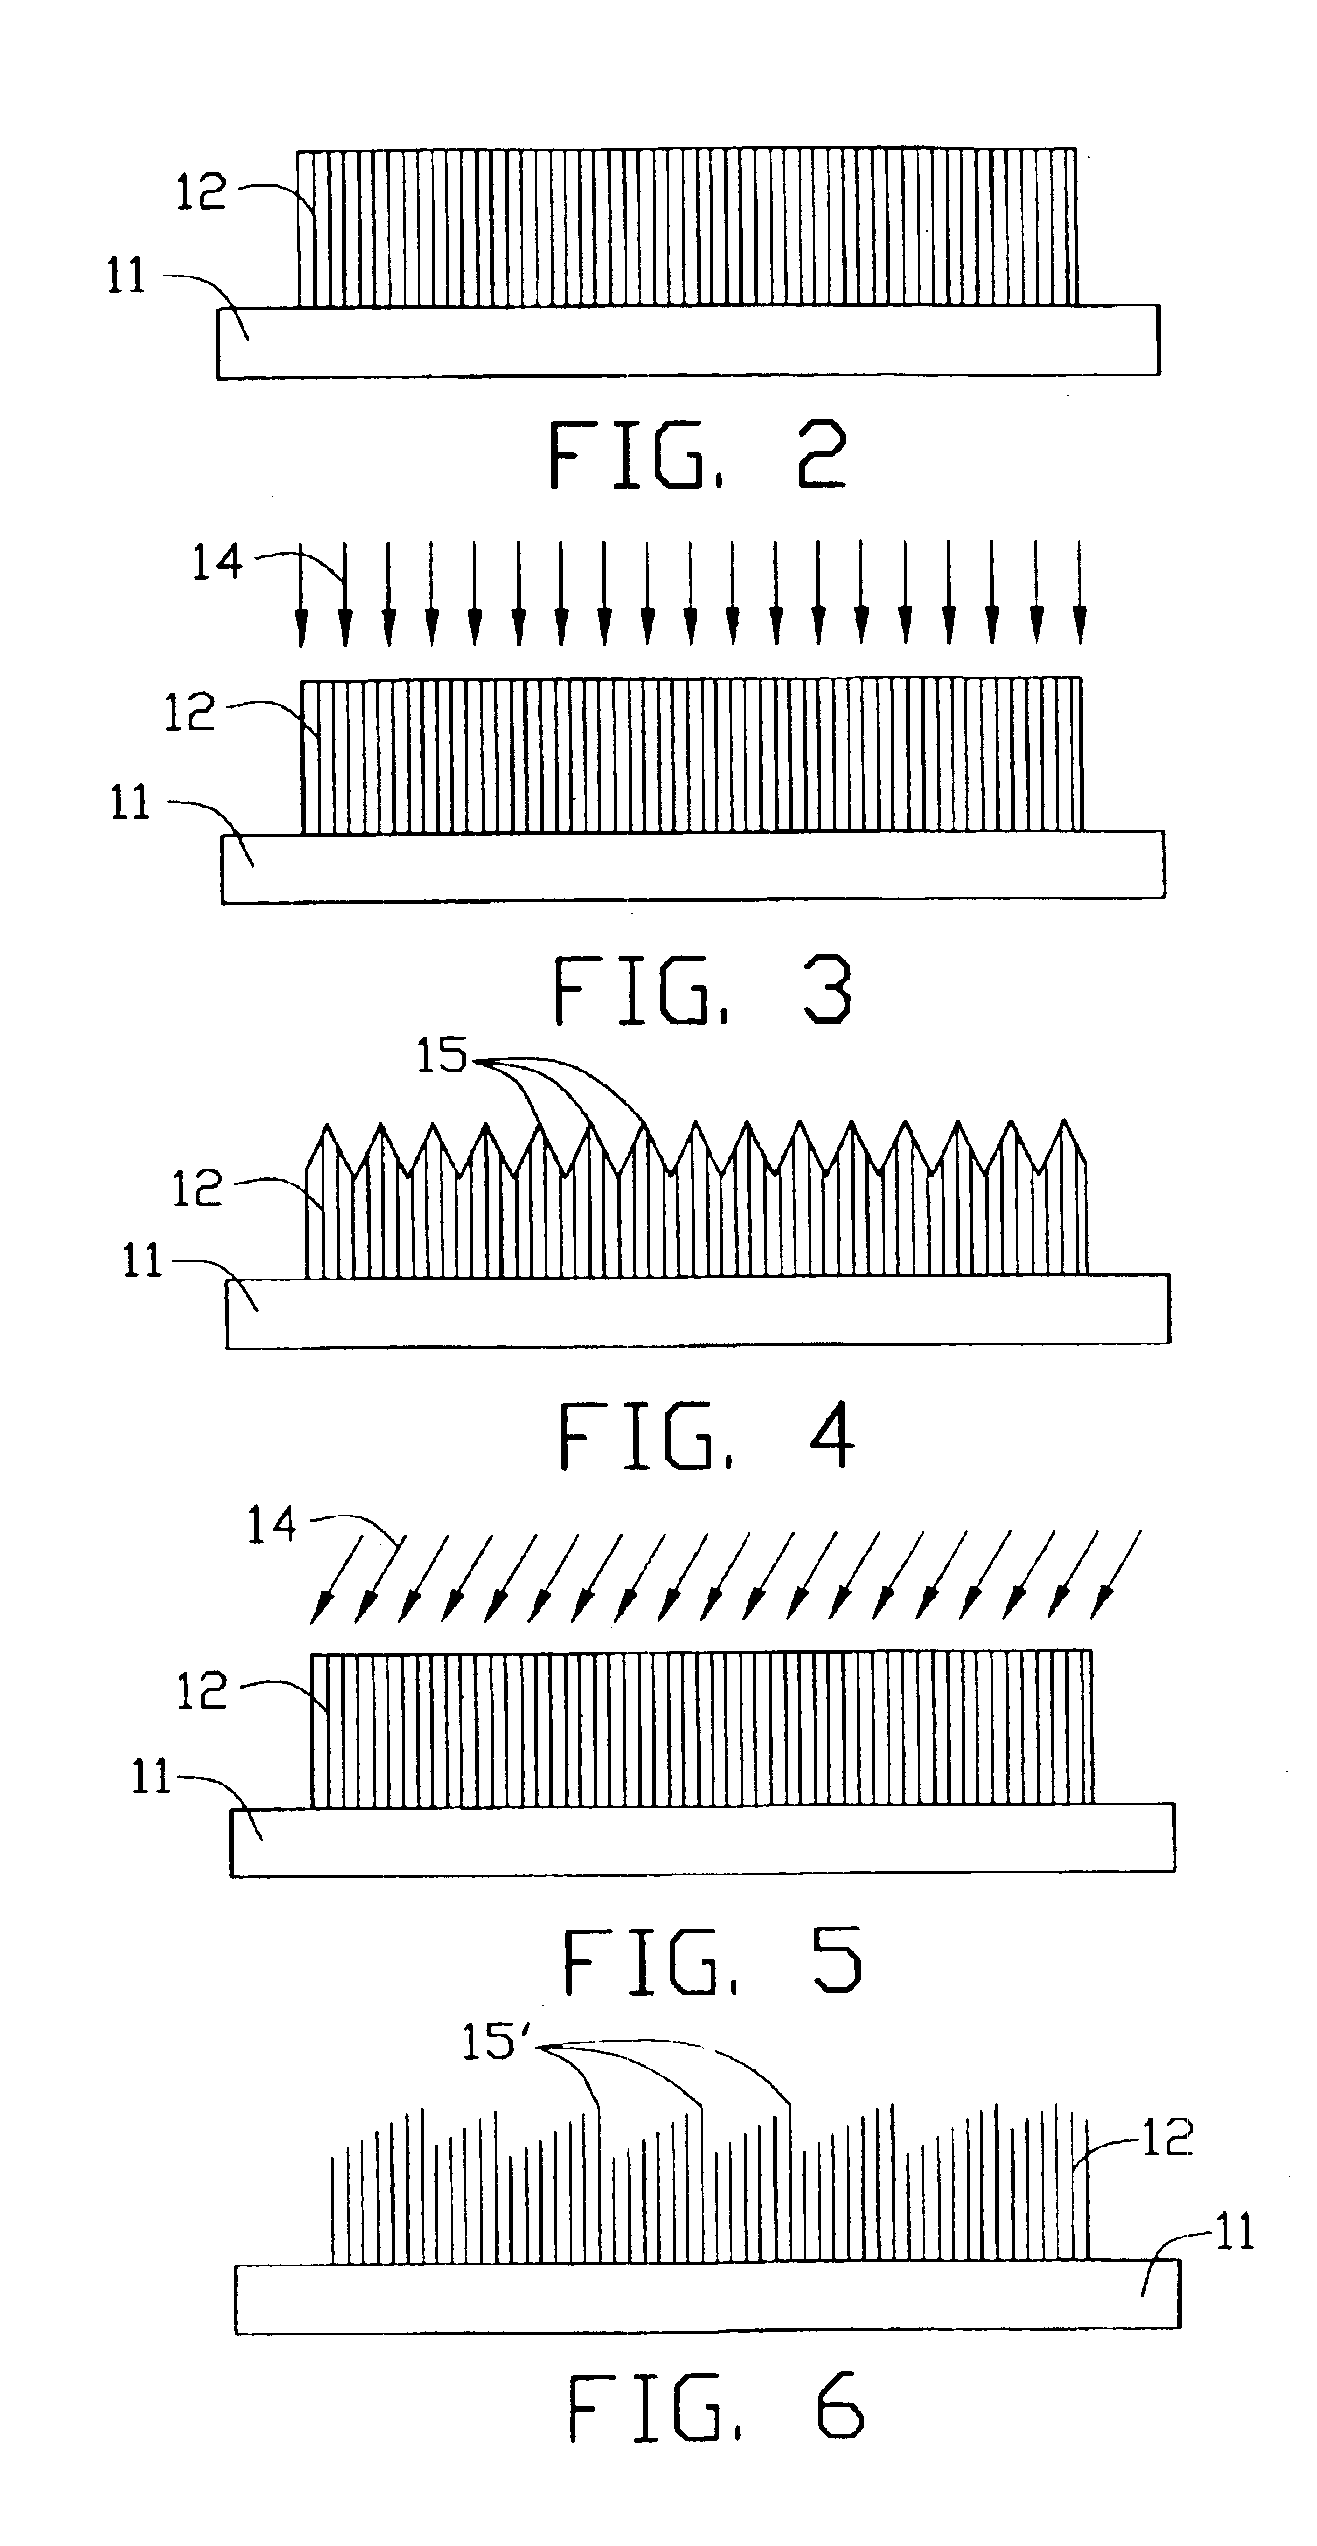 Method for processing one-dimensional nano-materials